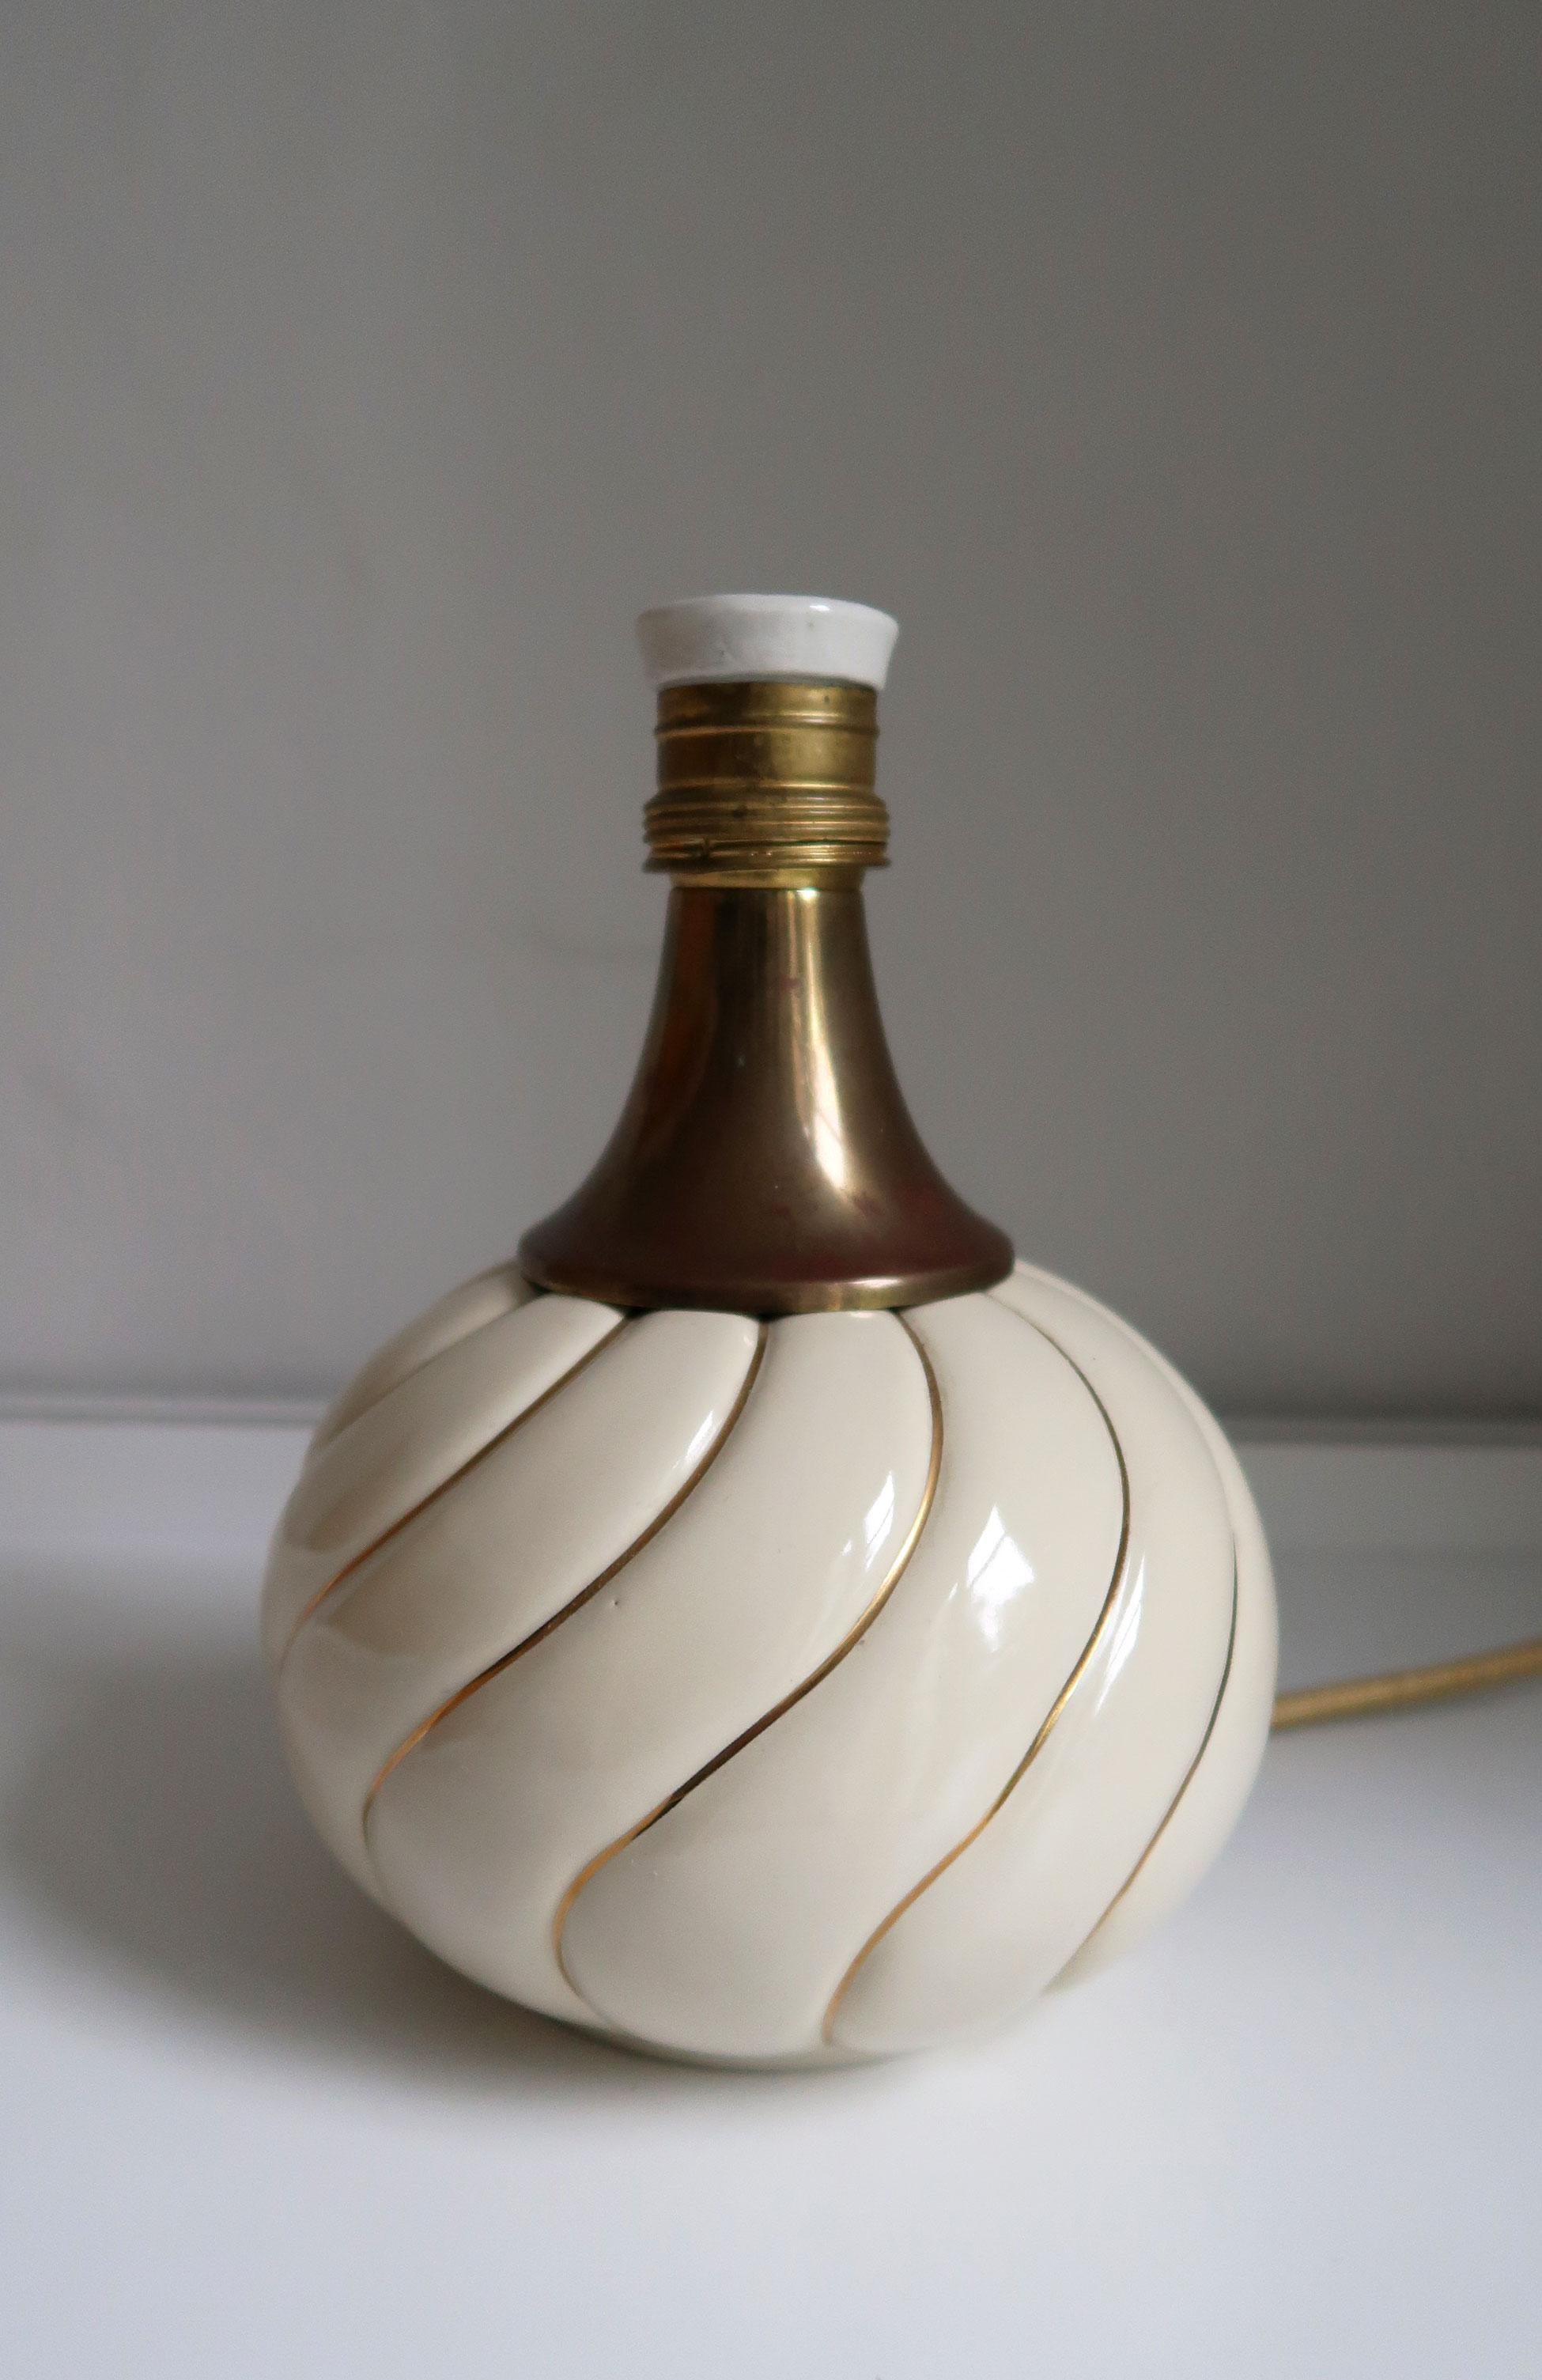 Curvy vintage Tommaso Barbi style table lamp. Ceramic cream colored lamp base with golden striped spiral pattern. Brass top and porcelain fitting. Rewired with golden fabric covered cord. In beautiful vintage condition.